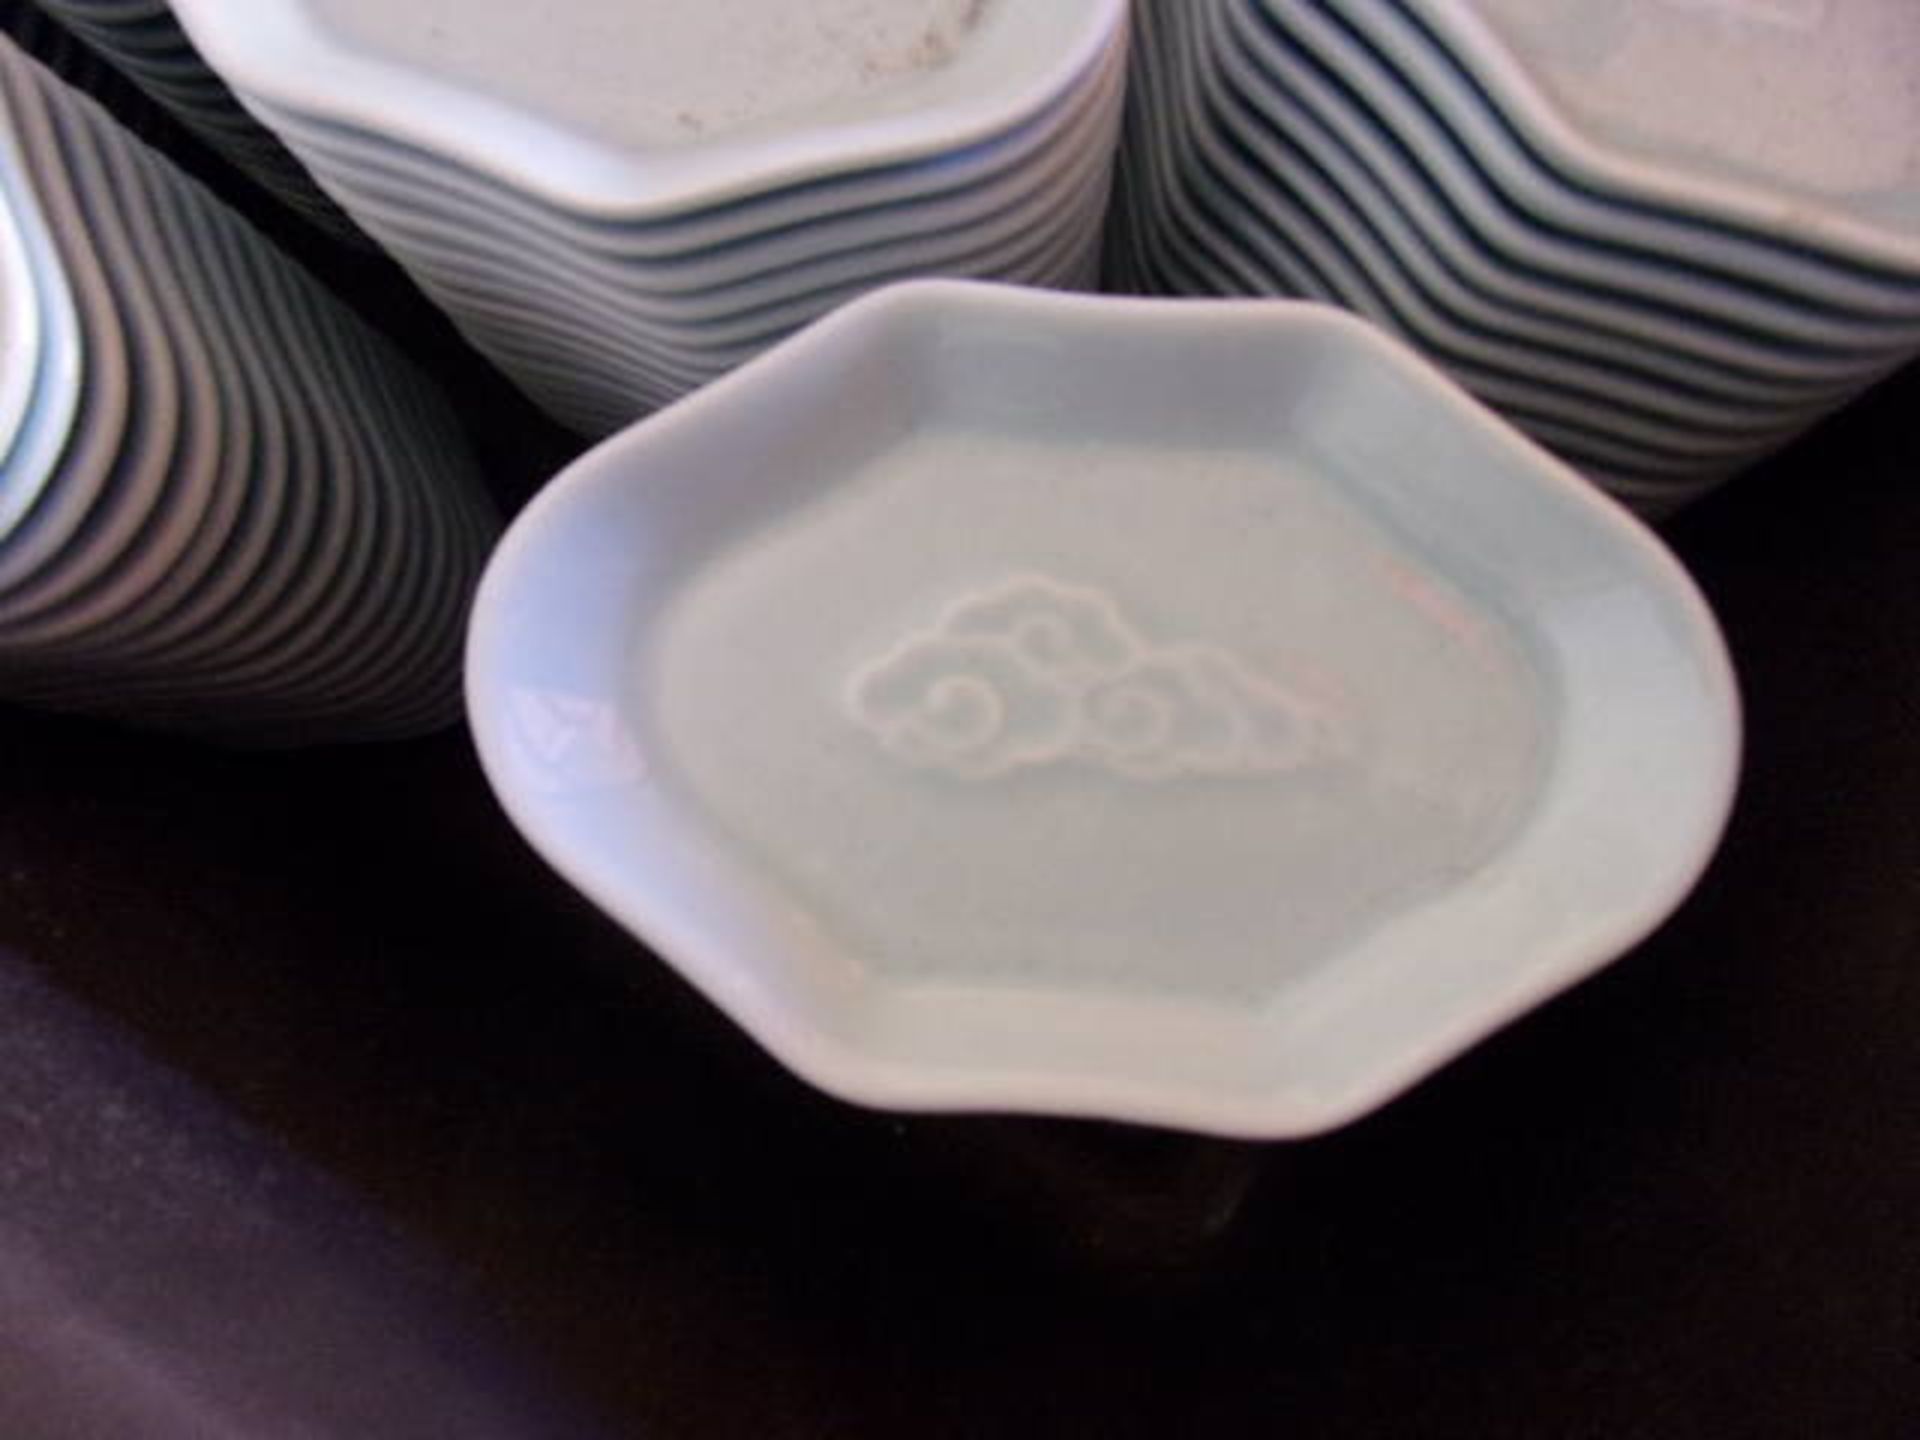 LOT OF STEELITE SMALL BLUE PLATES (QTY: 700) - Image 2 of 2